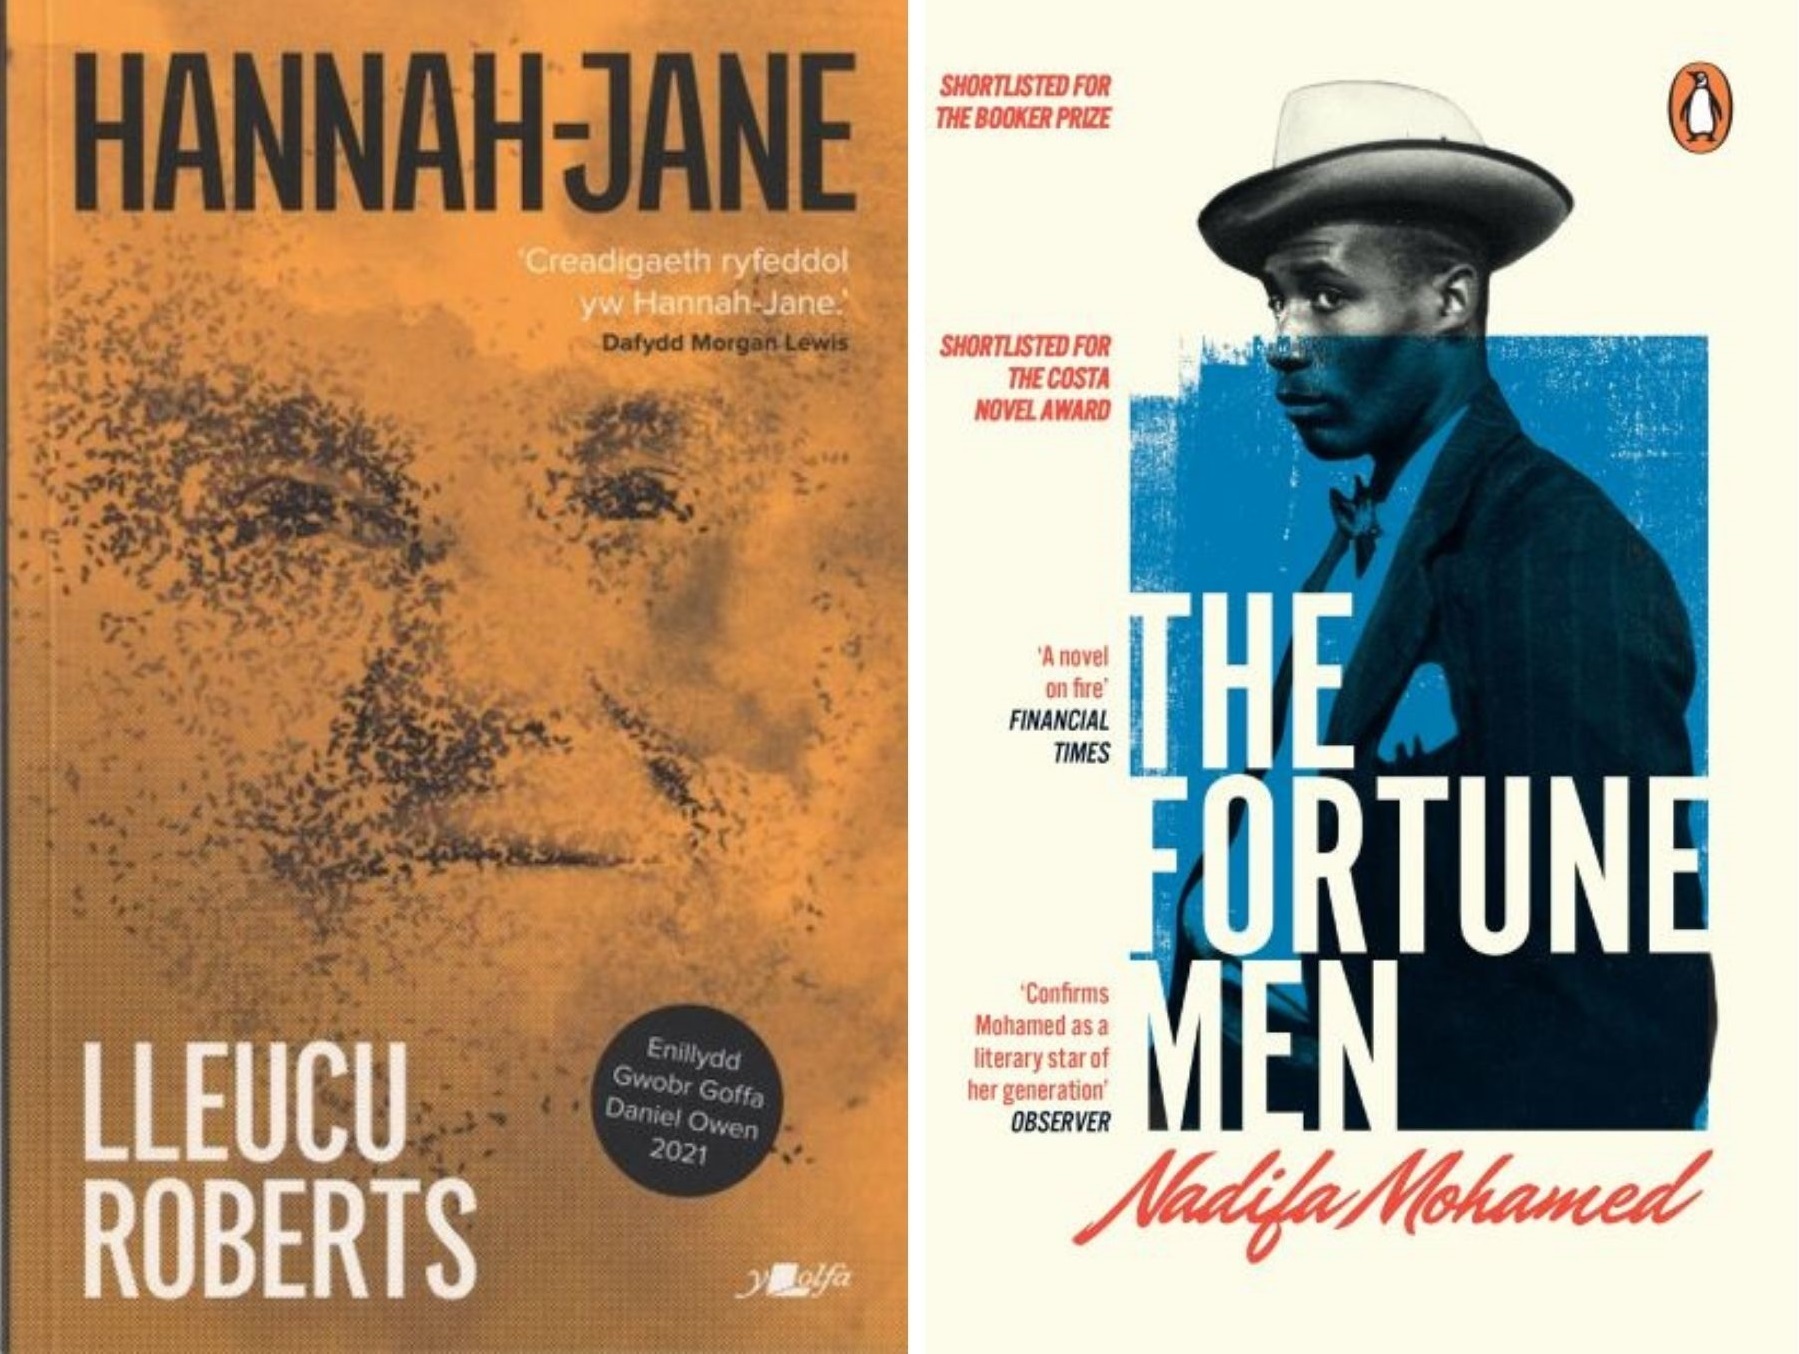 Hannah-Jane by Lleucu Roberts and The Fortune Men by Nadifa Mohamed.